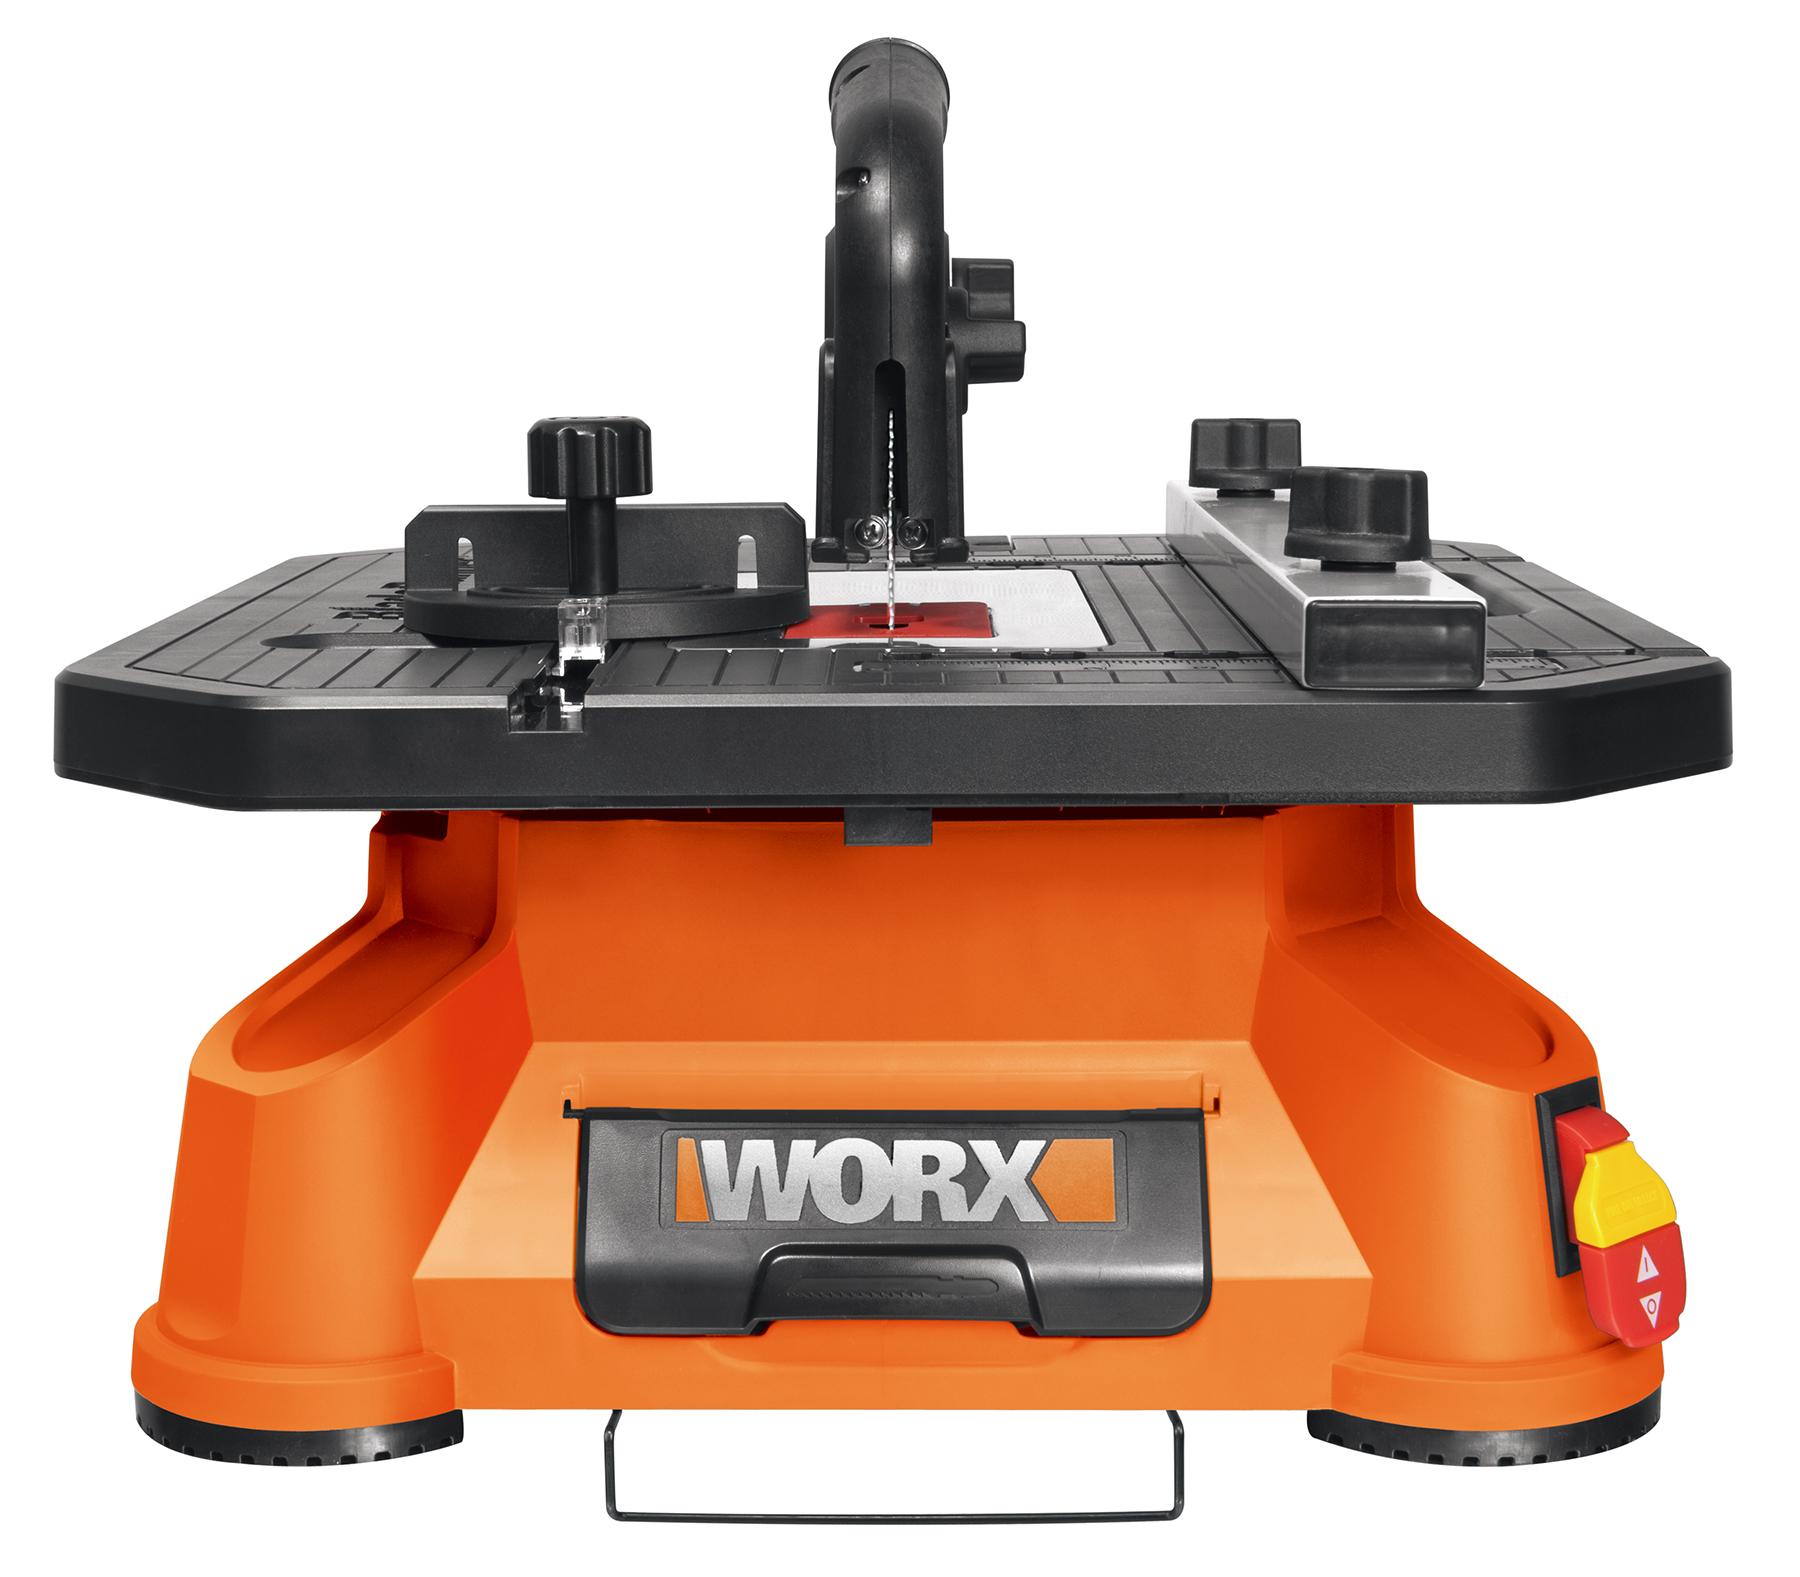 WORX BladeRunner Portable Table Top Saw (WX572L)